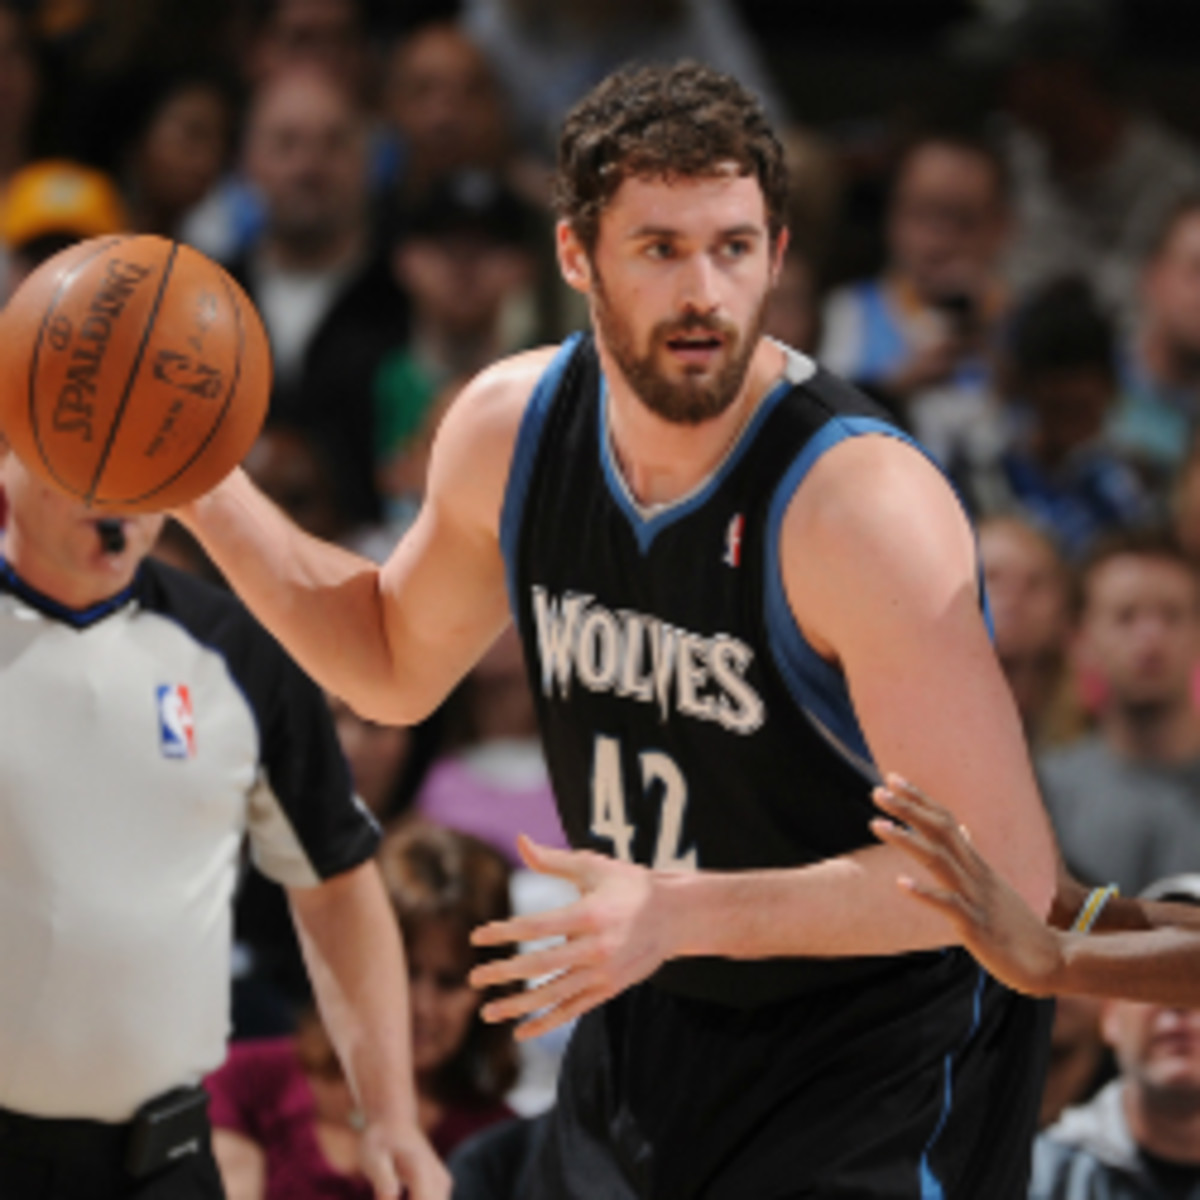 Timberwolves forward Kevin Love had successful knee surgery, with a recovery time of 4-6 weeks. (Garrett Ellwood/Getty Images)